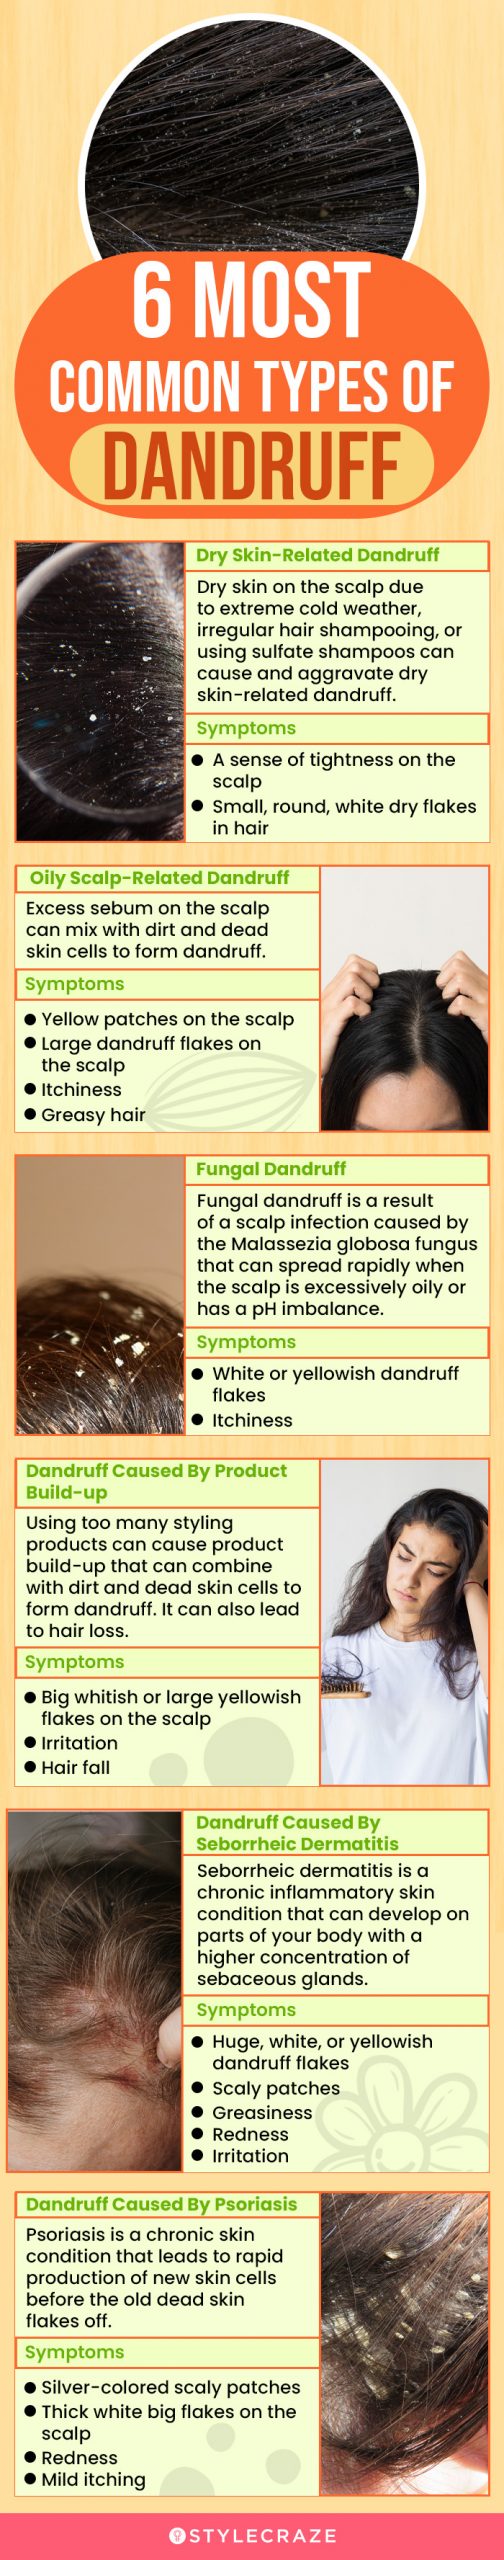 What Do Flakes In Your Hair REALLY Mean Dandruff From Itchy Dry Scalp Vs  Seborrheic Dermatitis  YouTube